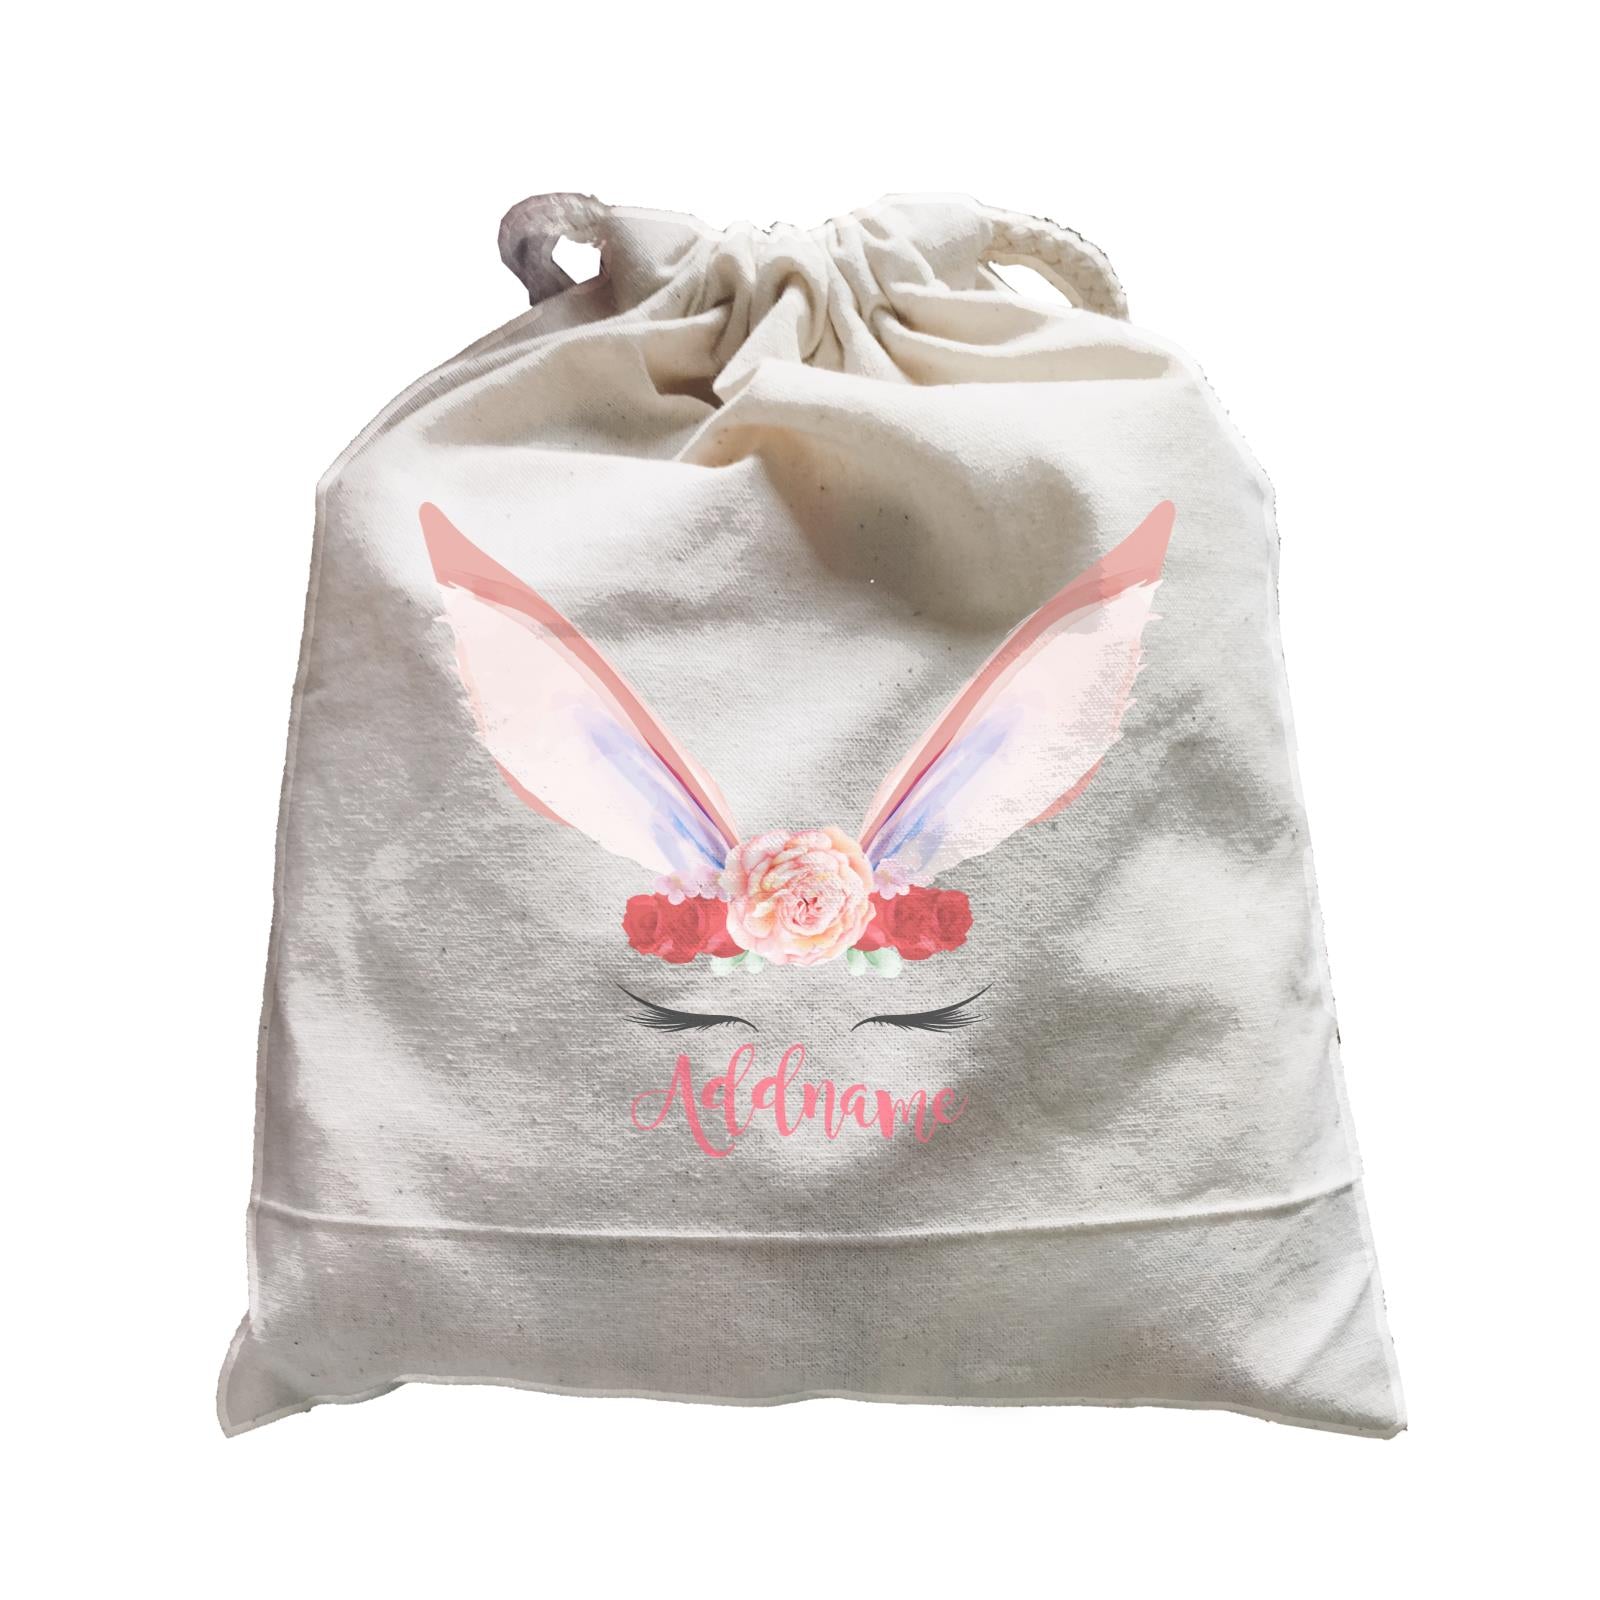 Pink and Red Roses Garland Bunny Face Addname Satchel